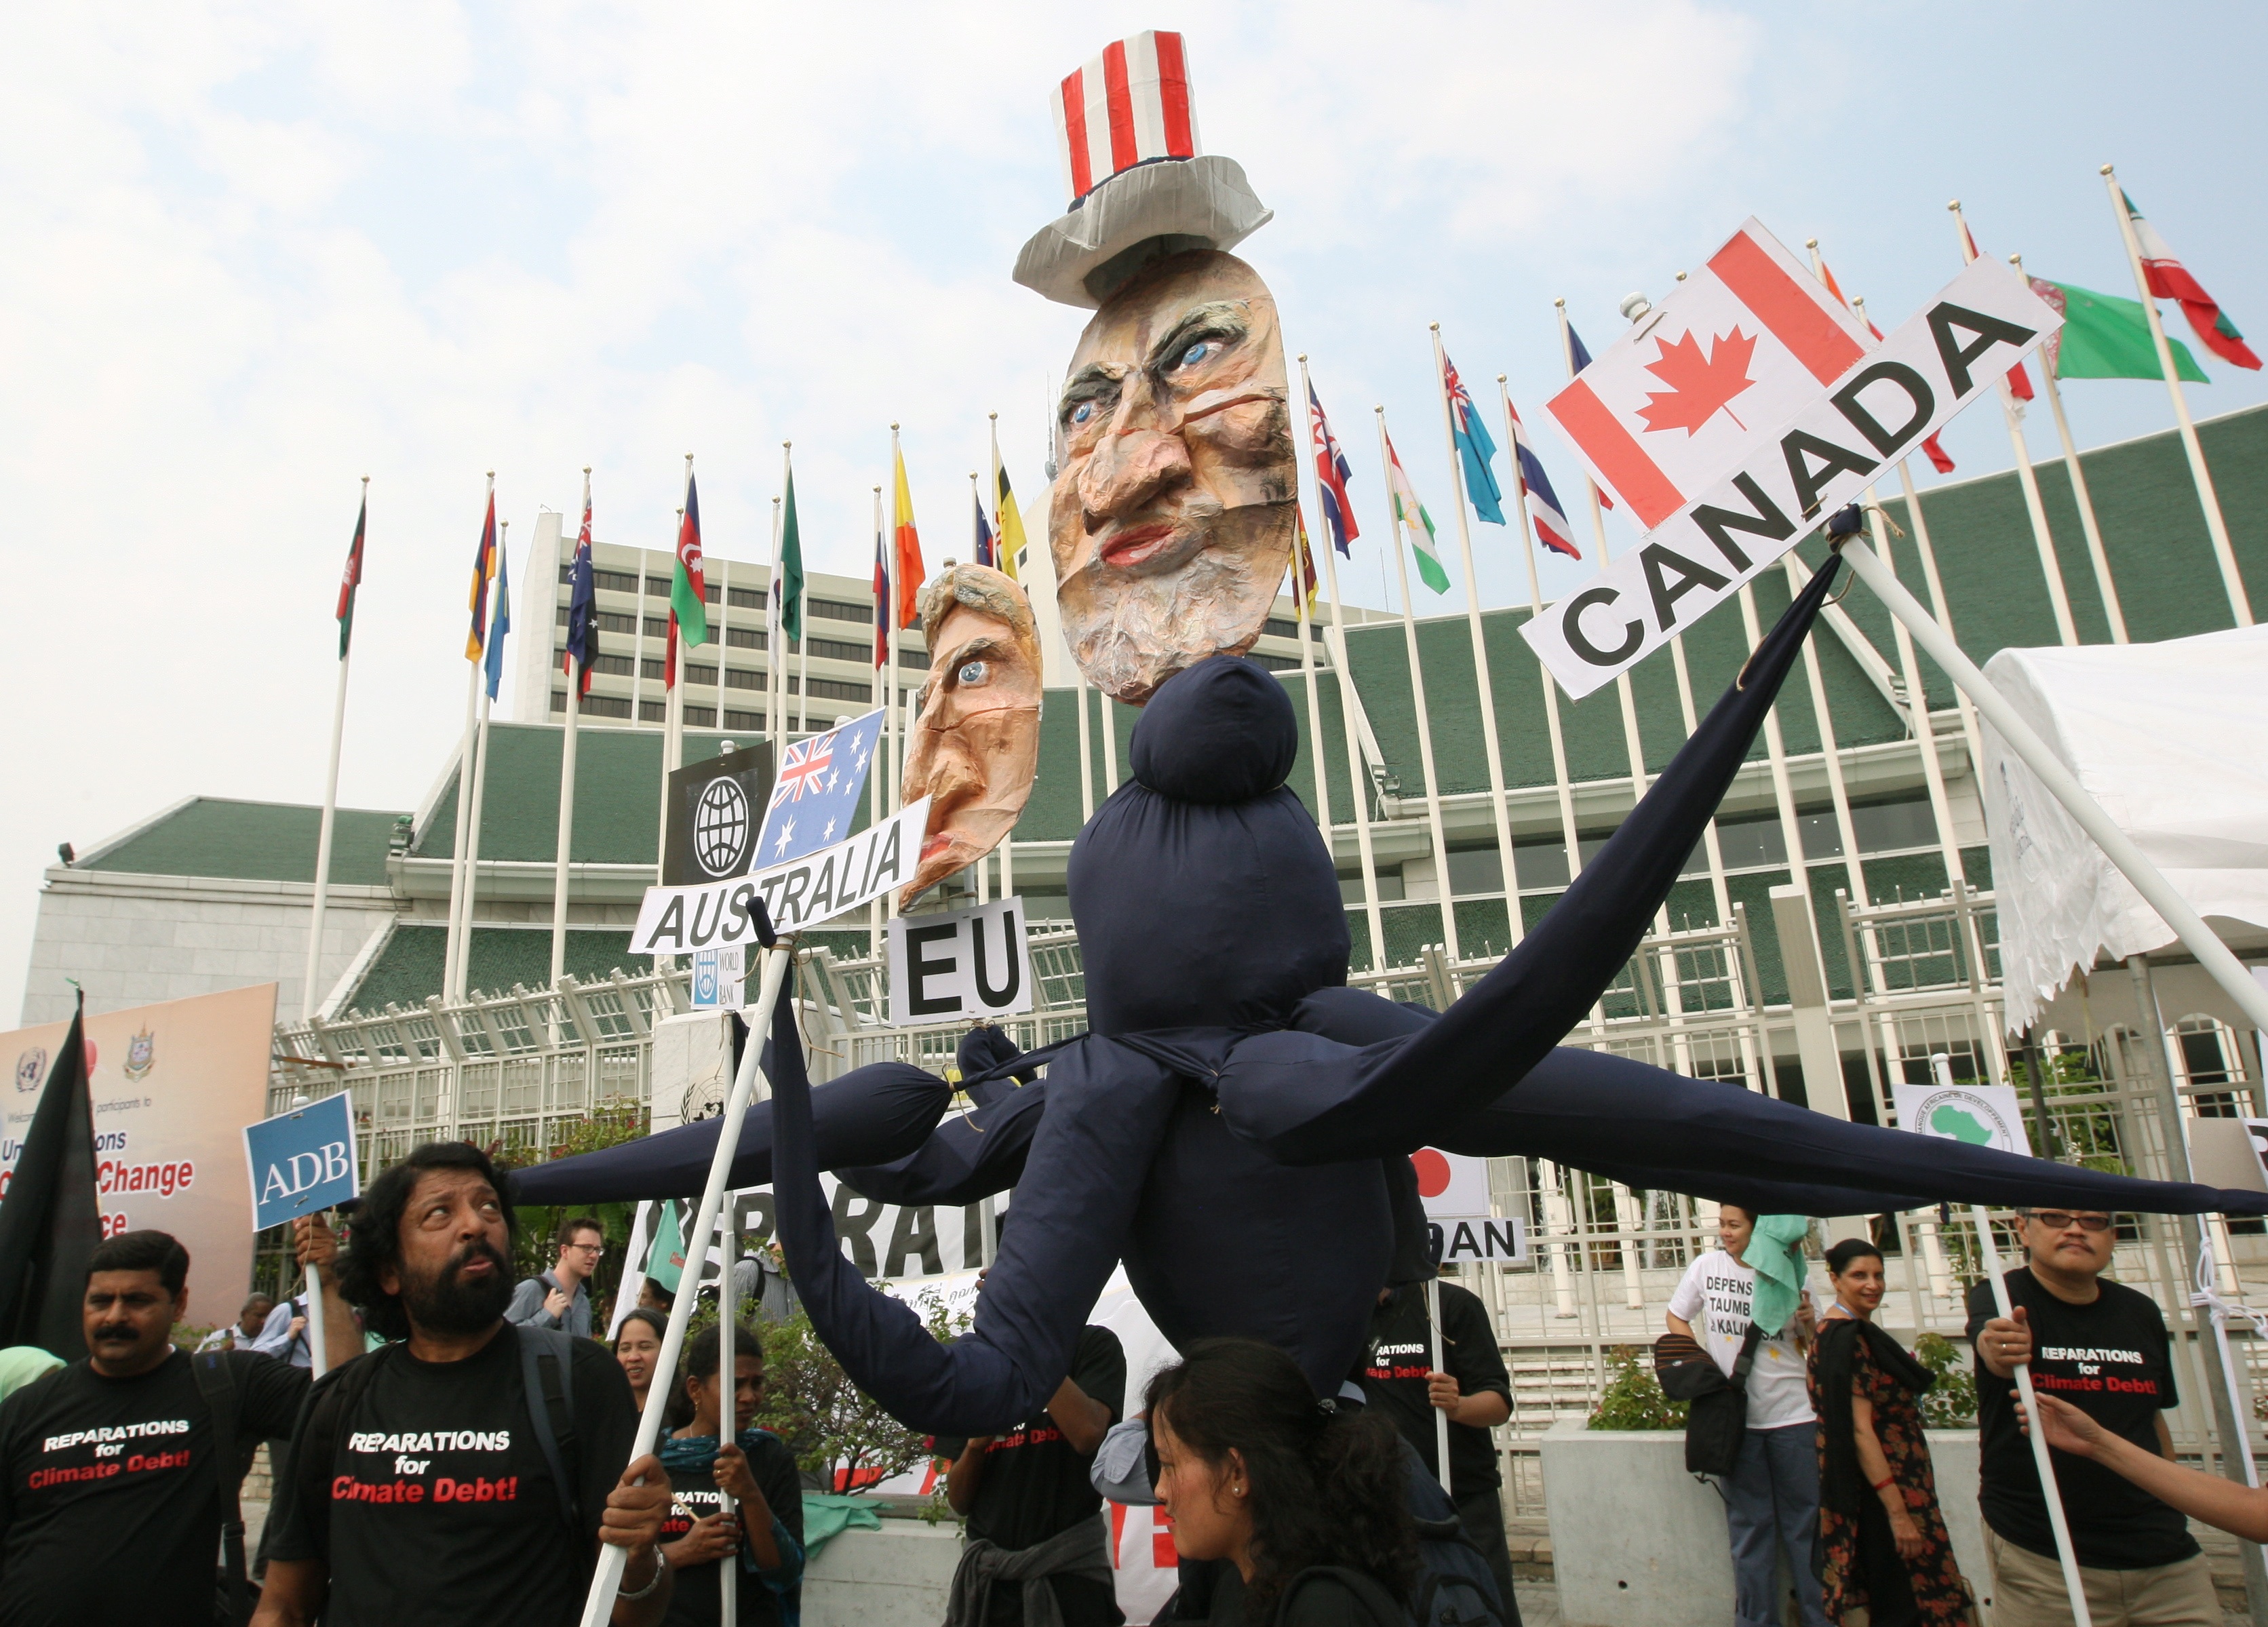 "Reparations for climate debt" demanded by civil-society activists in Bangkok in April 2011.